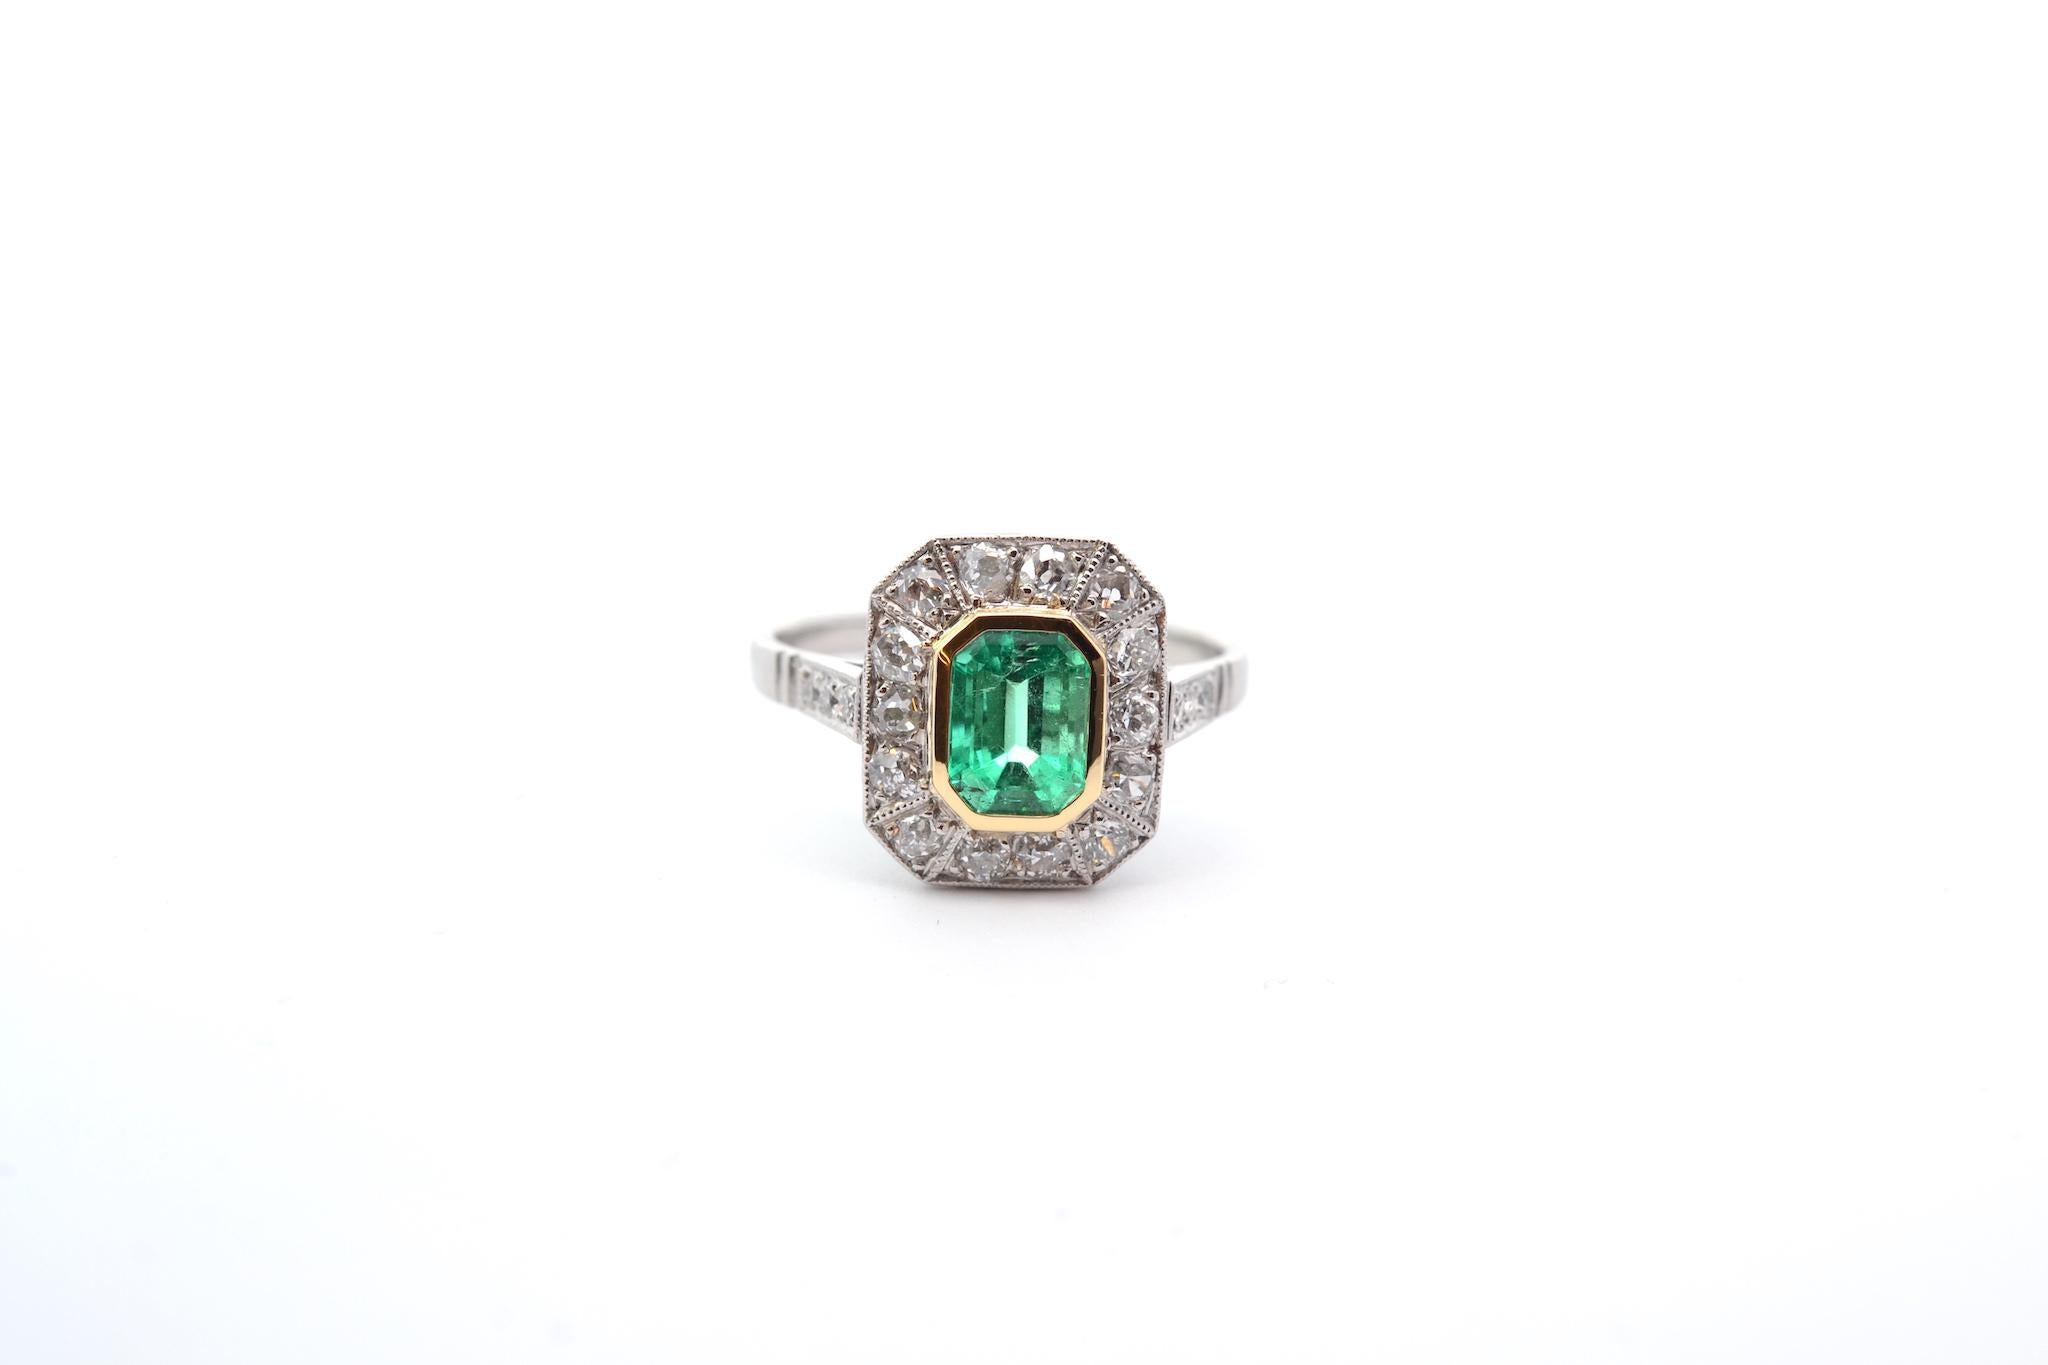 Stones: Emerald of 1.03cts, 20 diamonds: 0.60ct
Material: Platinum and yellow gold
Dimensions: 1.3cm x 1.1cm
Weight: 4.4g
Period: Art Deco style
Size: 54 (free sizing)
Certificate
Ref. : 25021 25161